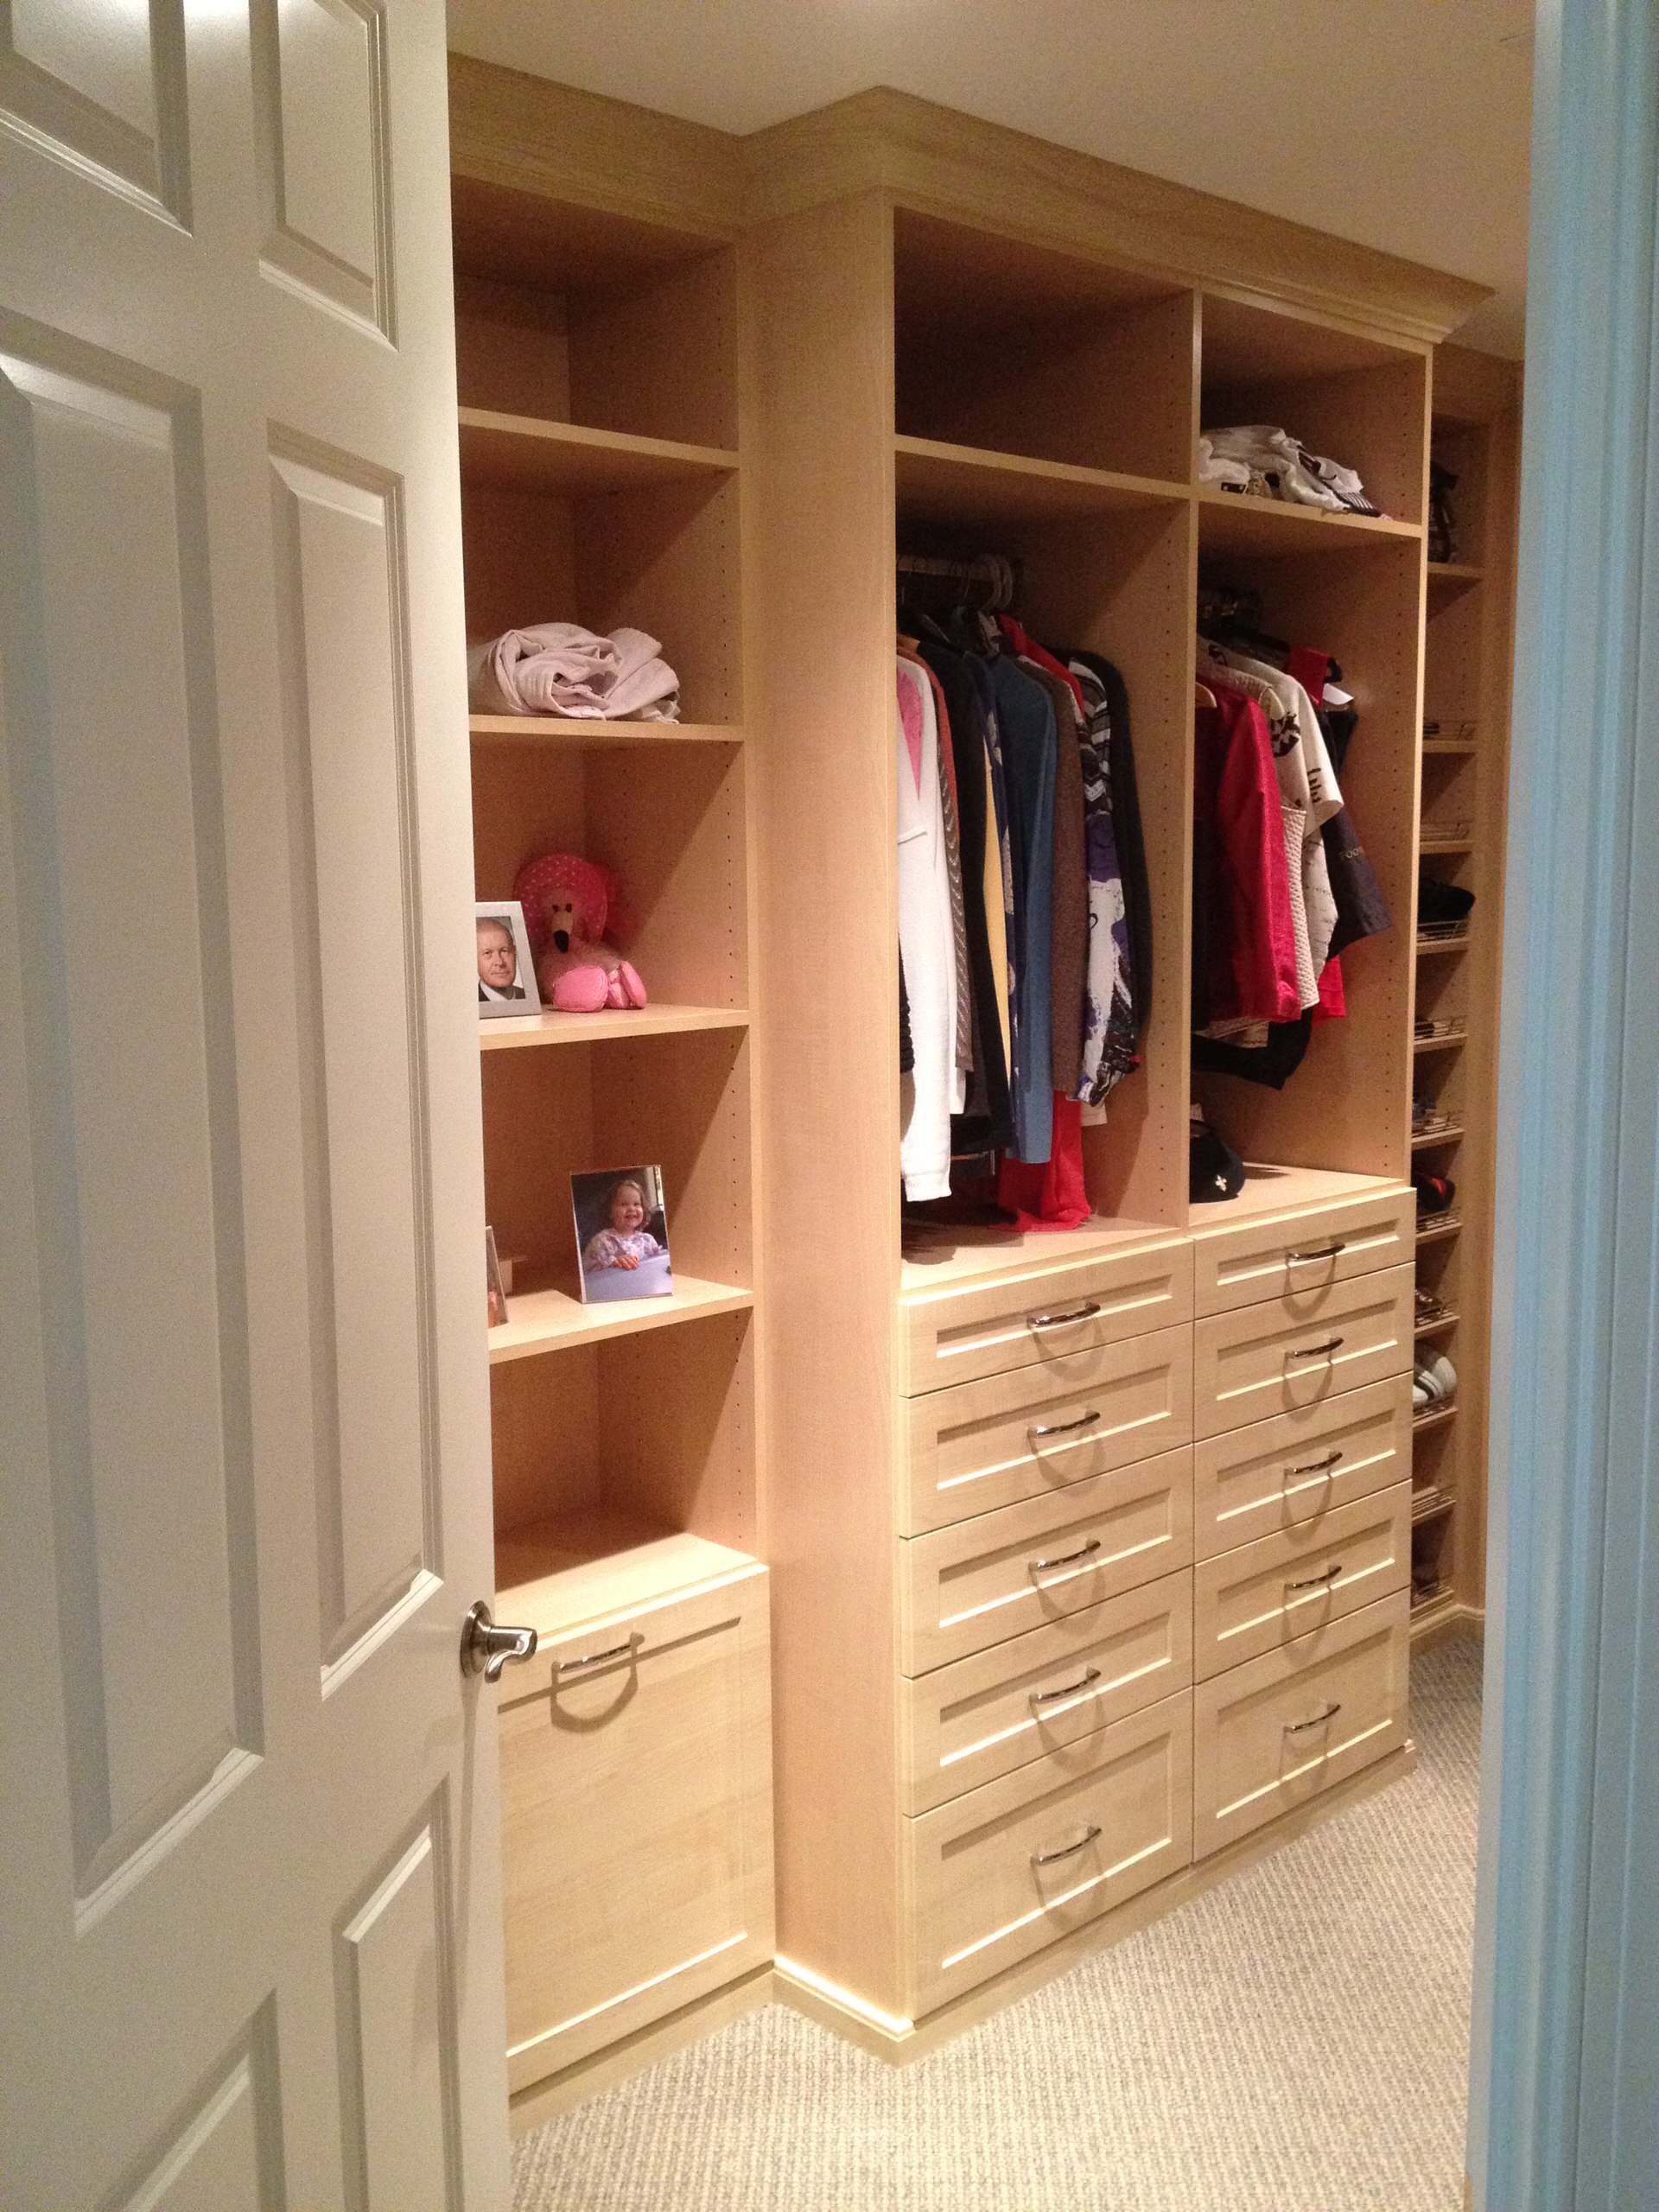 https://st.hzcdn.com/simgs/pictures/closets/great-use-of-space-odd-shaped-closet-inspired-closets-southwest-florida-img~e5618e500304101d_14-5007-1-5f4035c.jpg